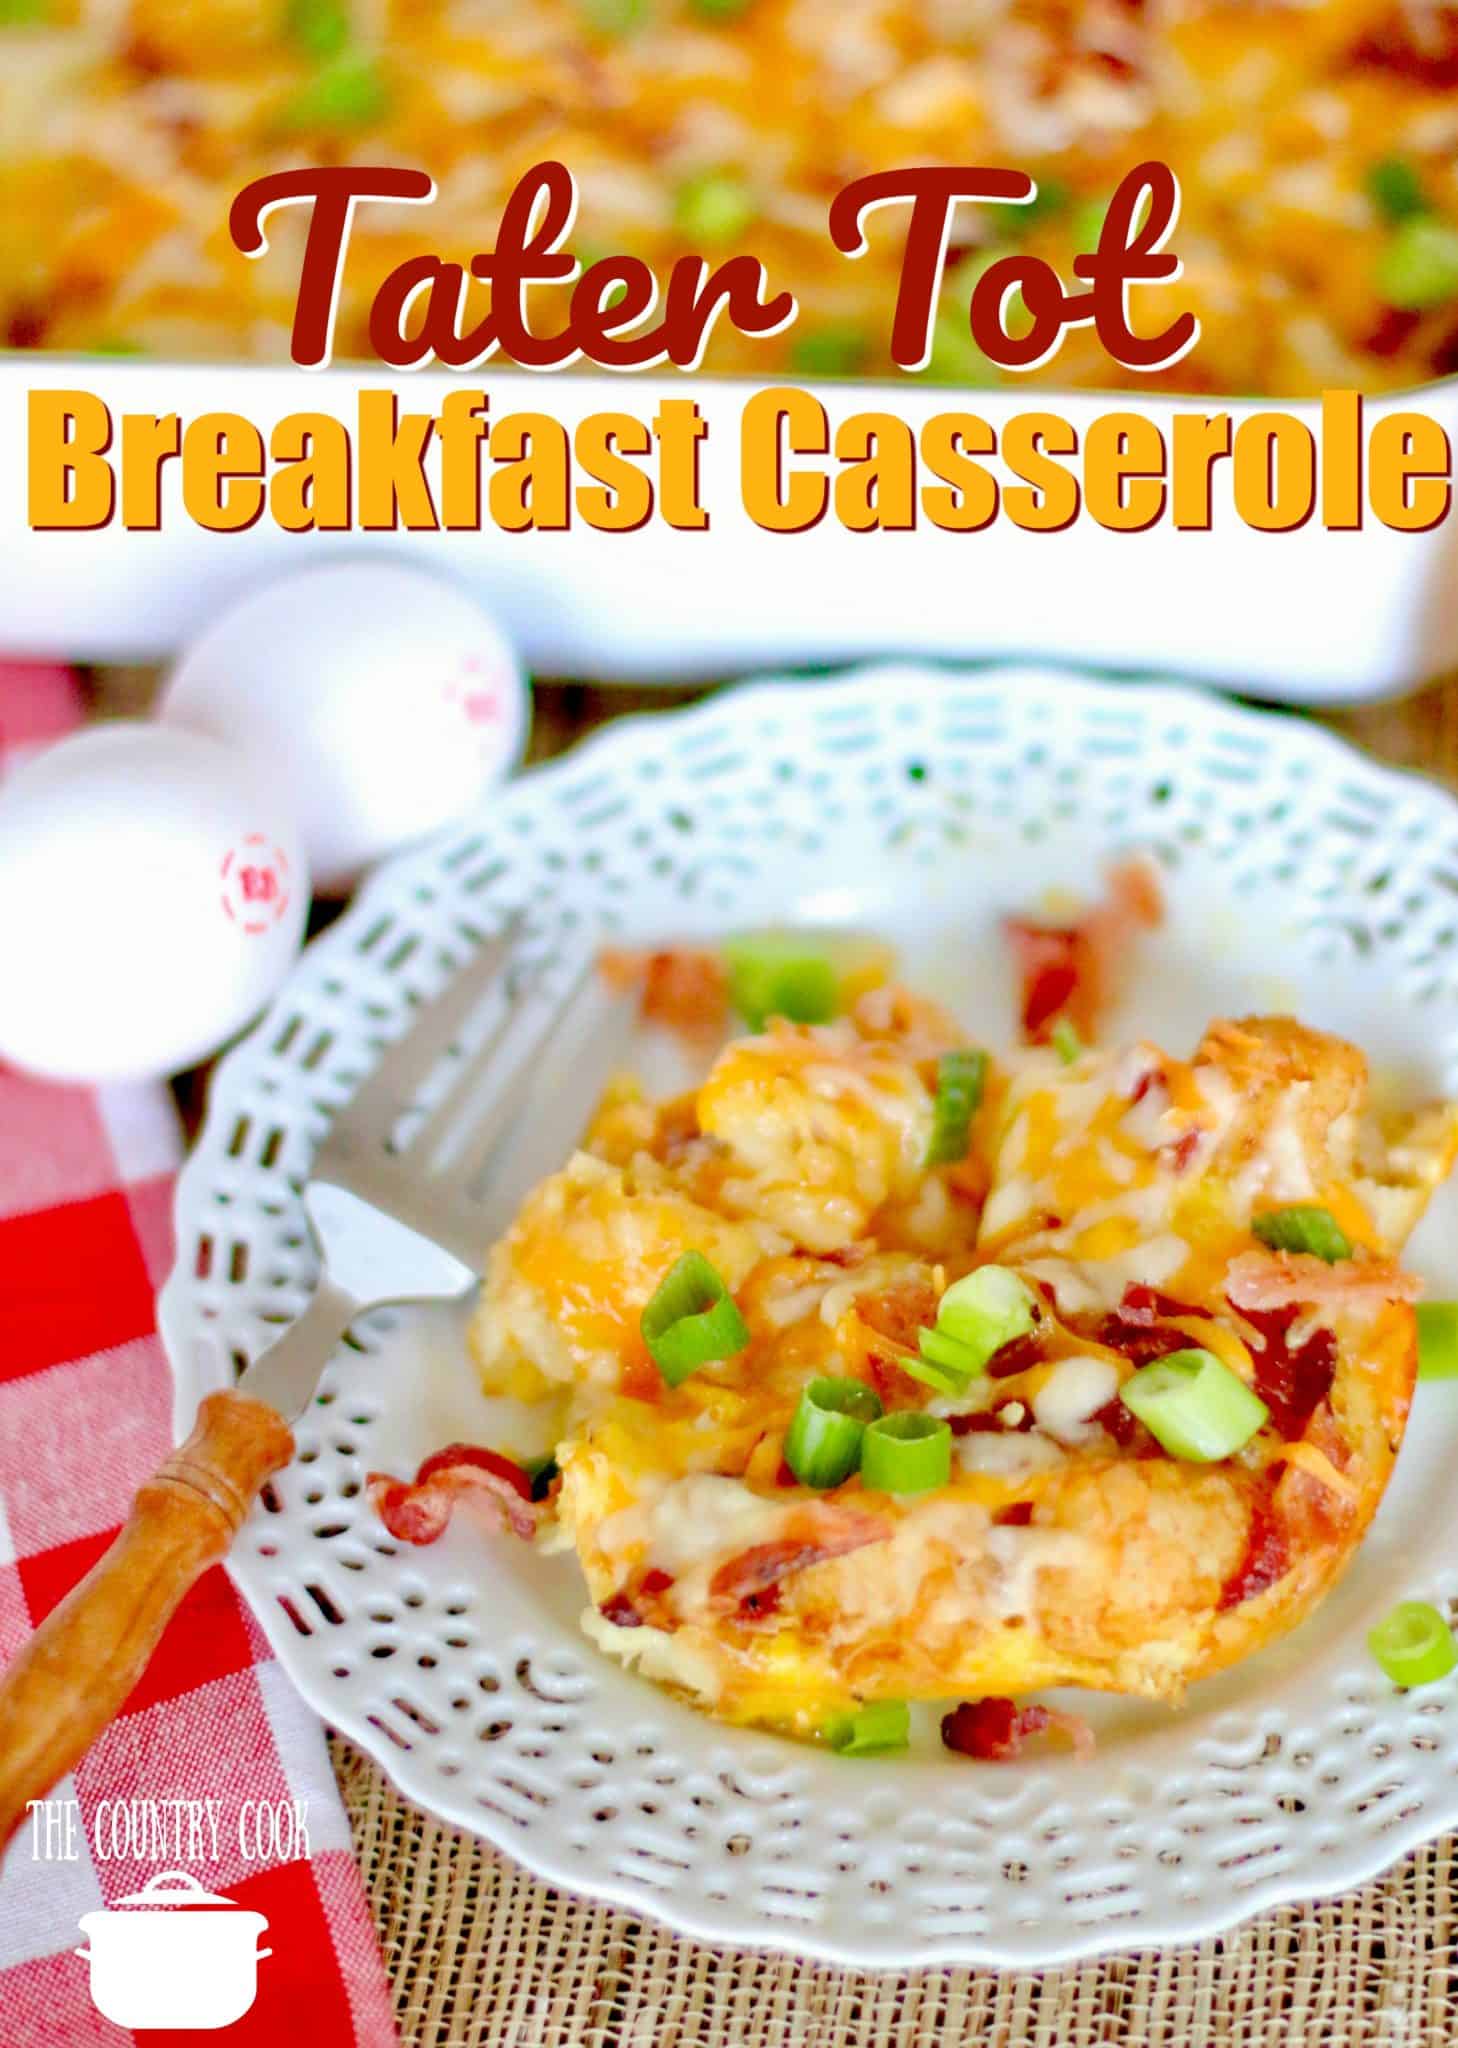 Tater Tot Breakfast Casserole recipe from The Country Cook.